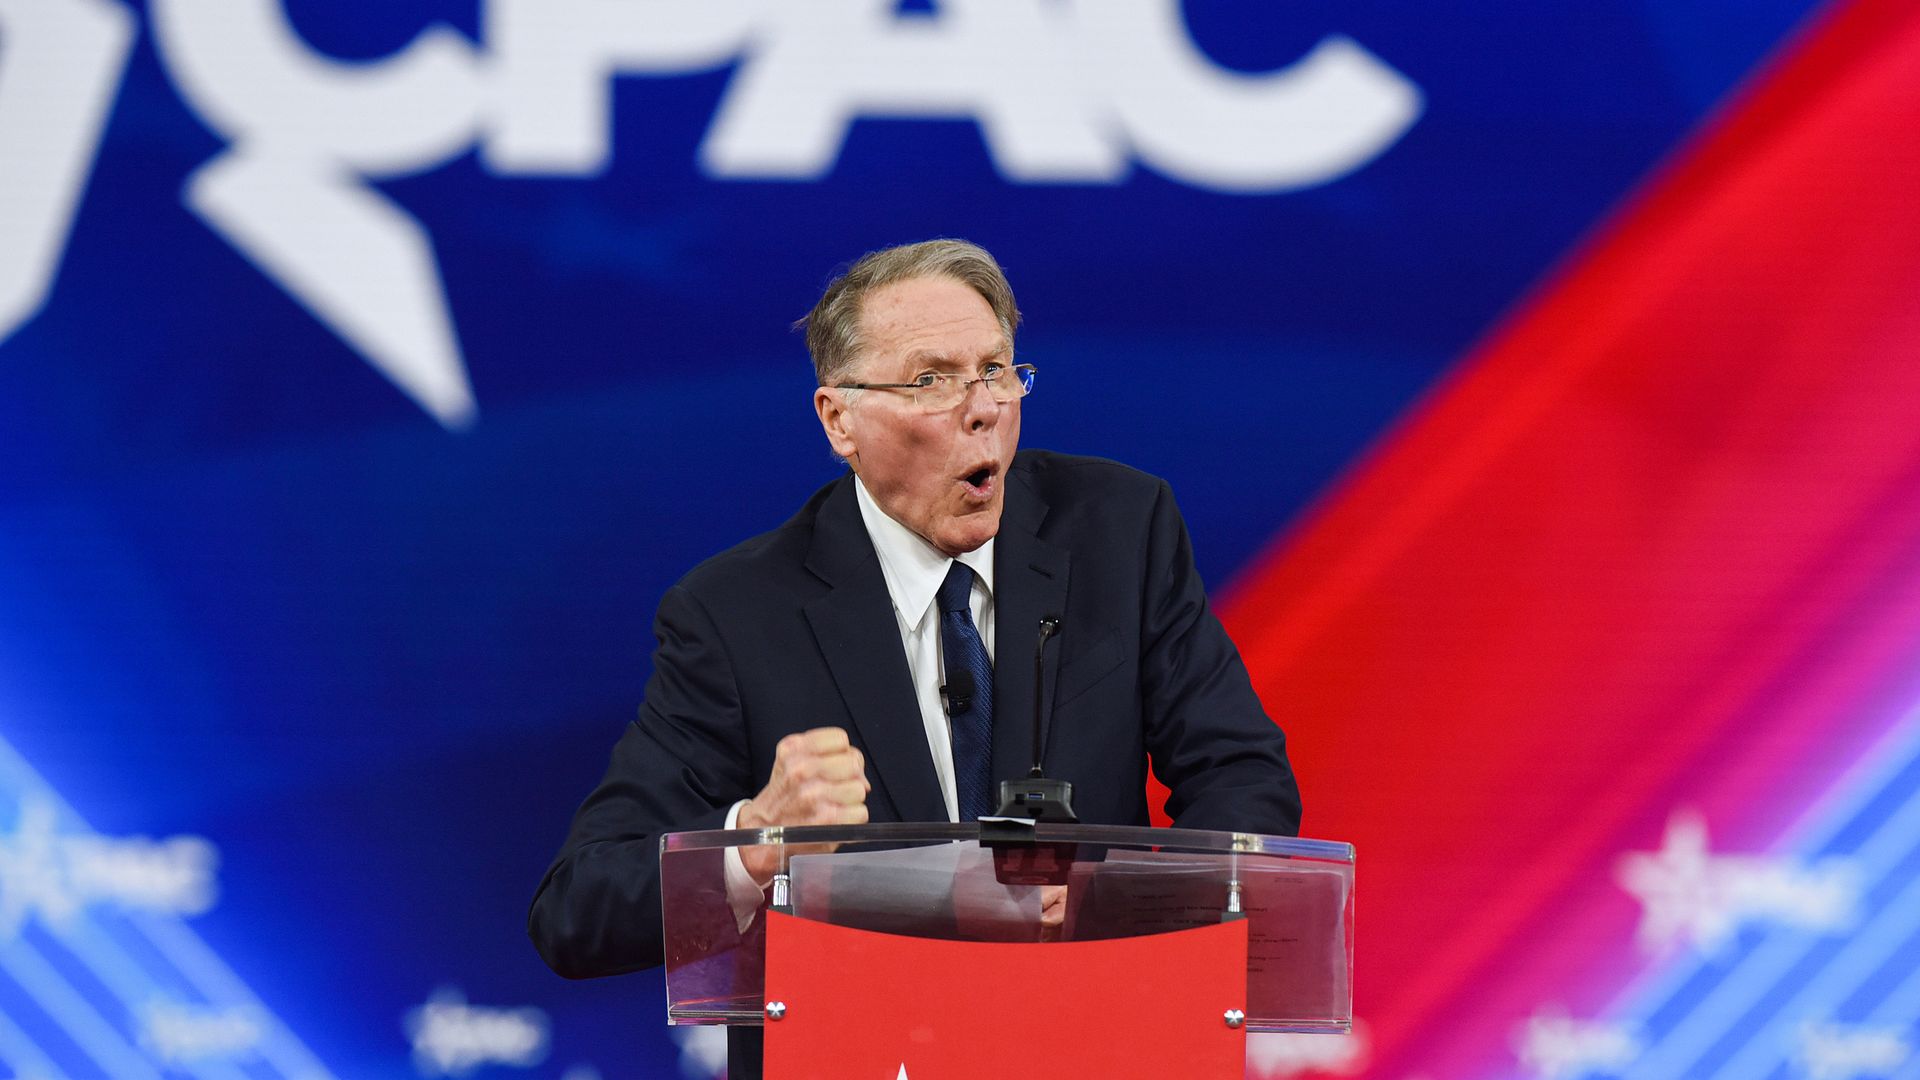 Wayne LaPierre, CEO and Executive Vice President of the National Rifle Association, speaking at CPAC 2022 in Orlando in February.